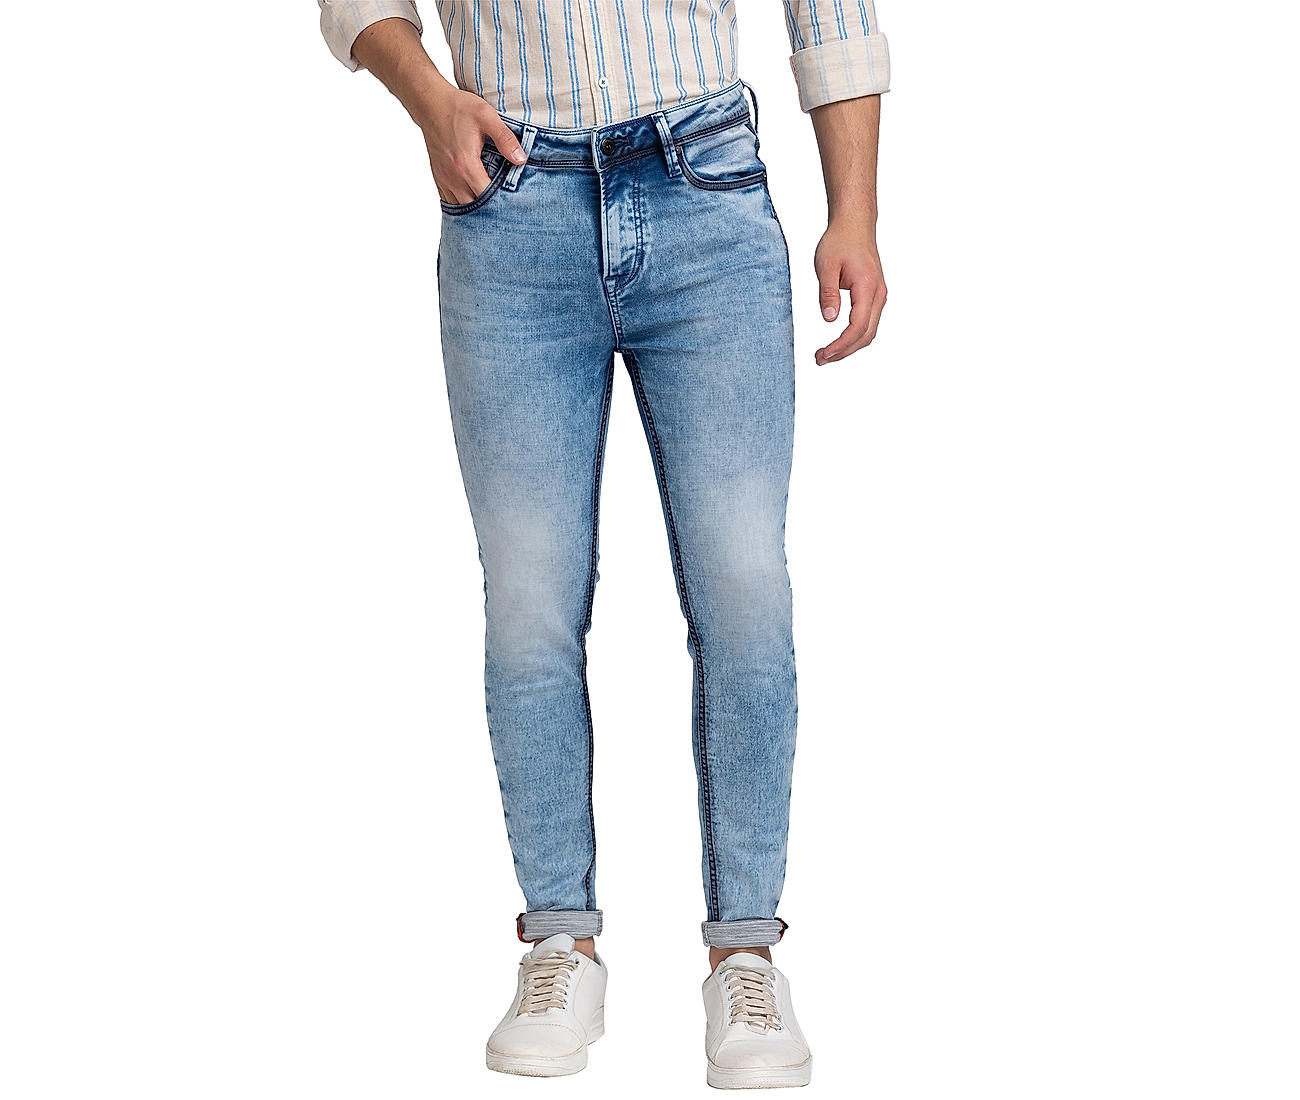 Men's Faded Blue Slim Fit Stretch Jeans